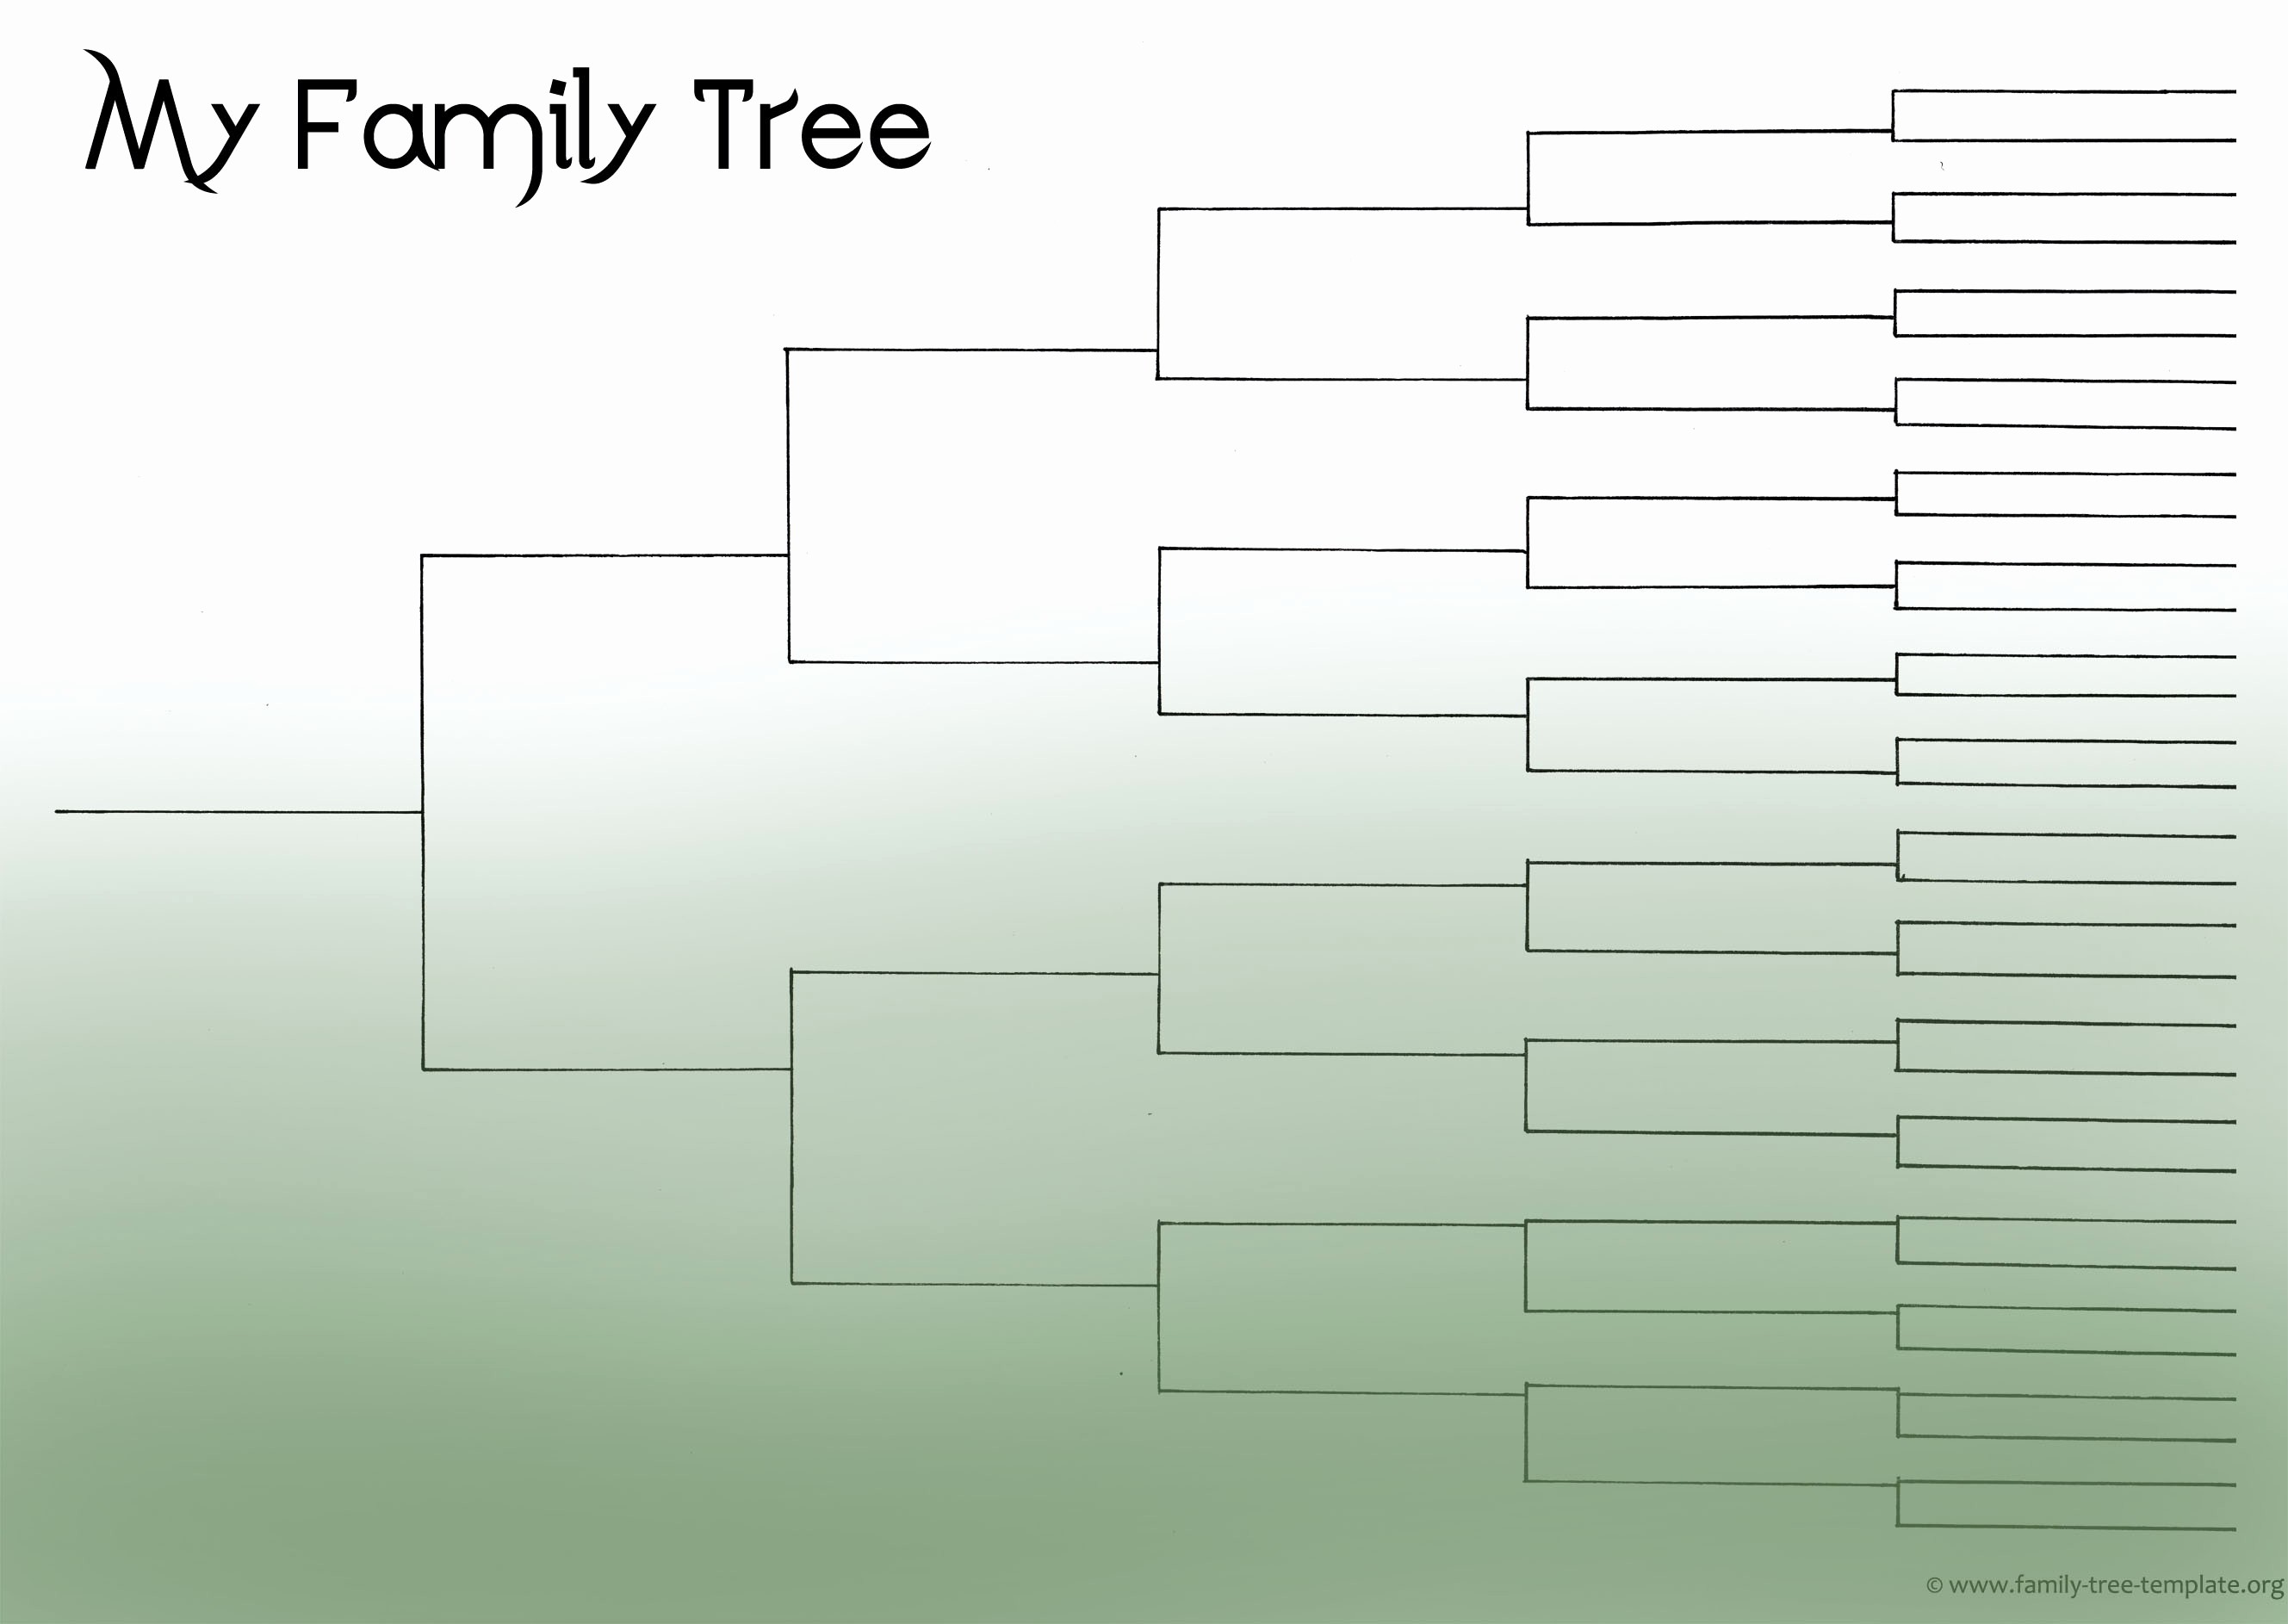 10 Generation Family Tree Template Awesome 5 Generation Family Tree Outline Bamboodownunder